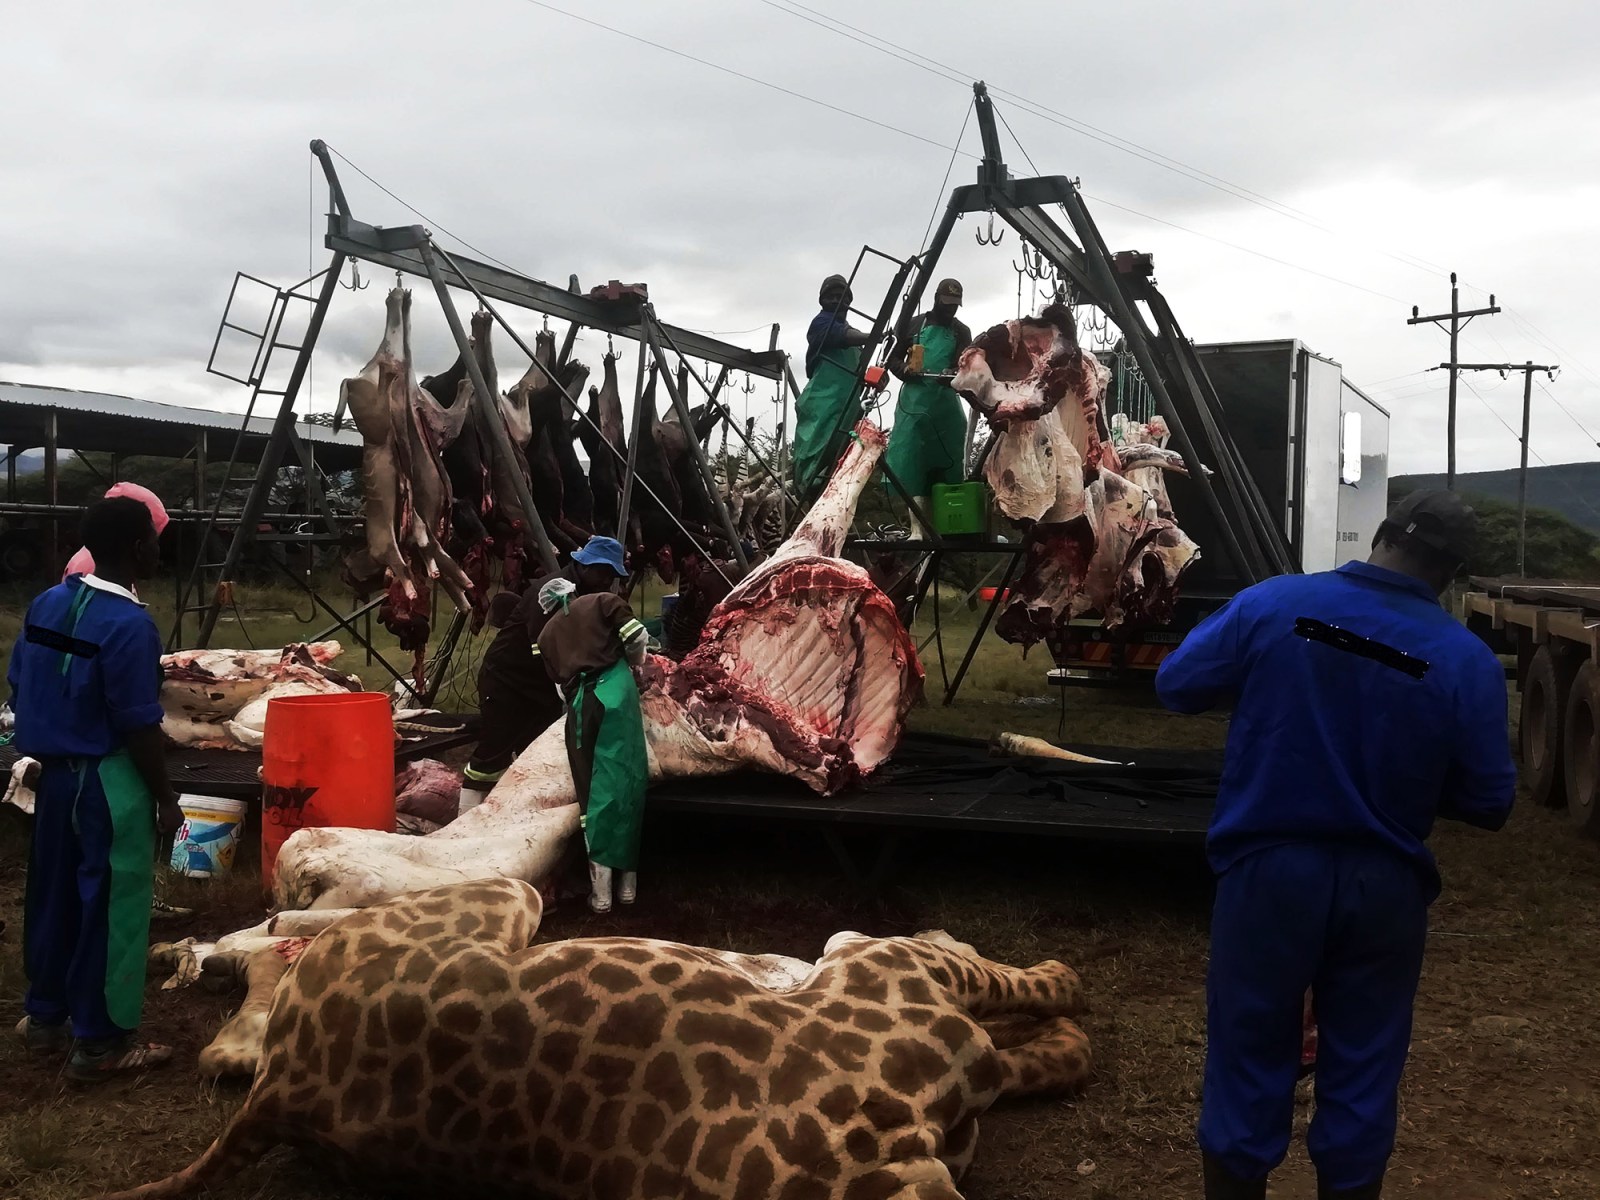 The culled wildlife are being sold for meat